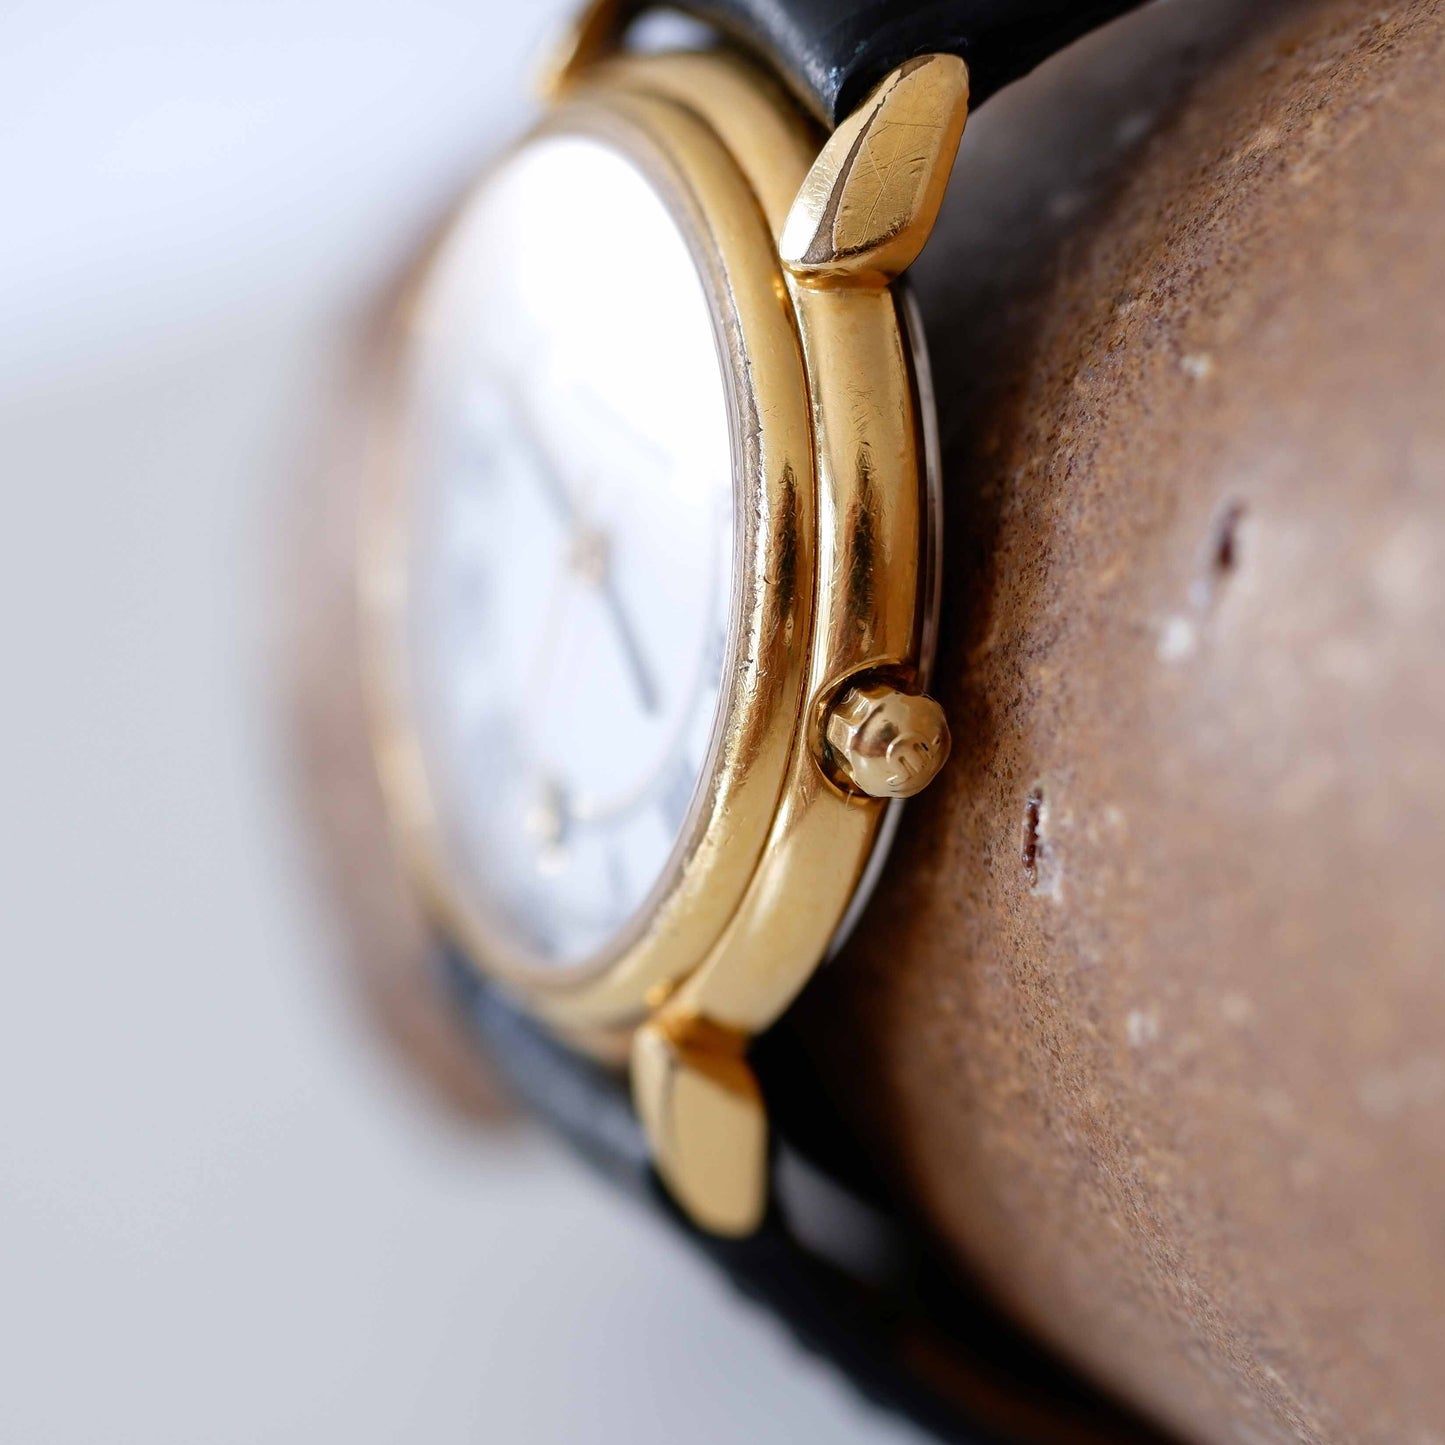 Maurice Lacroix Vintage Ladies Watch: 90s Golden with Classic Roman Numerals | Side View Right